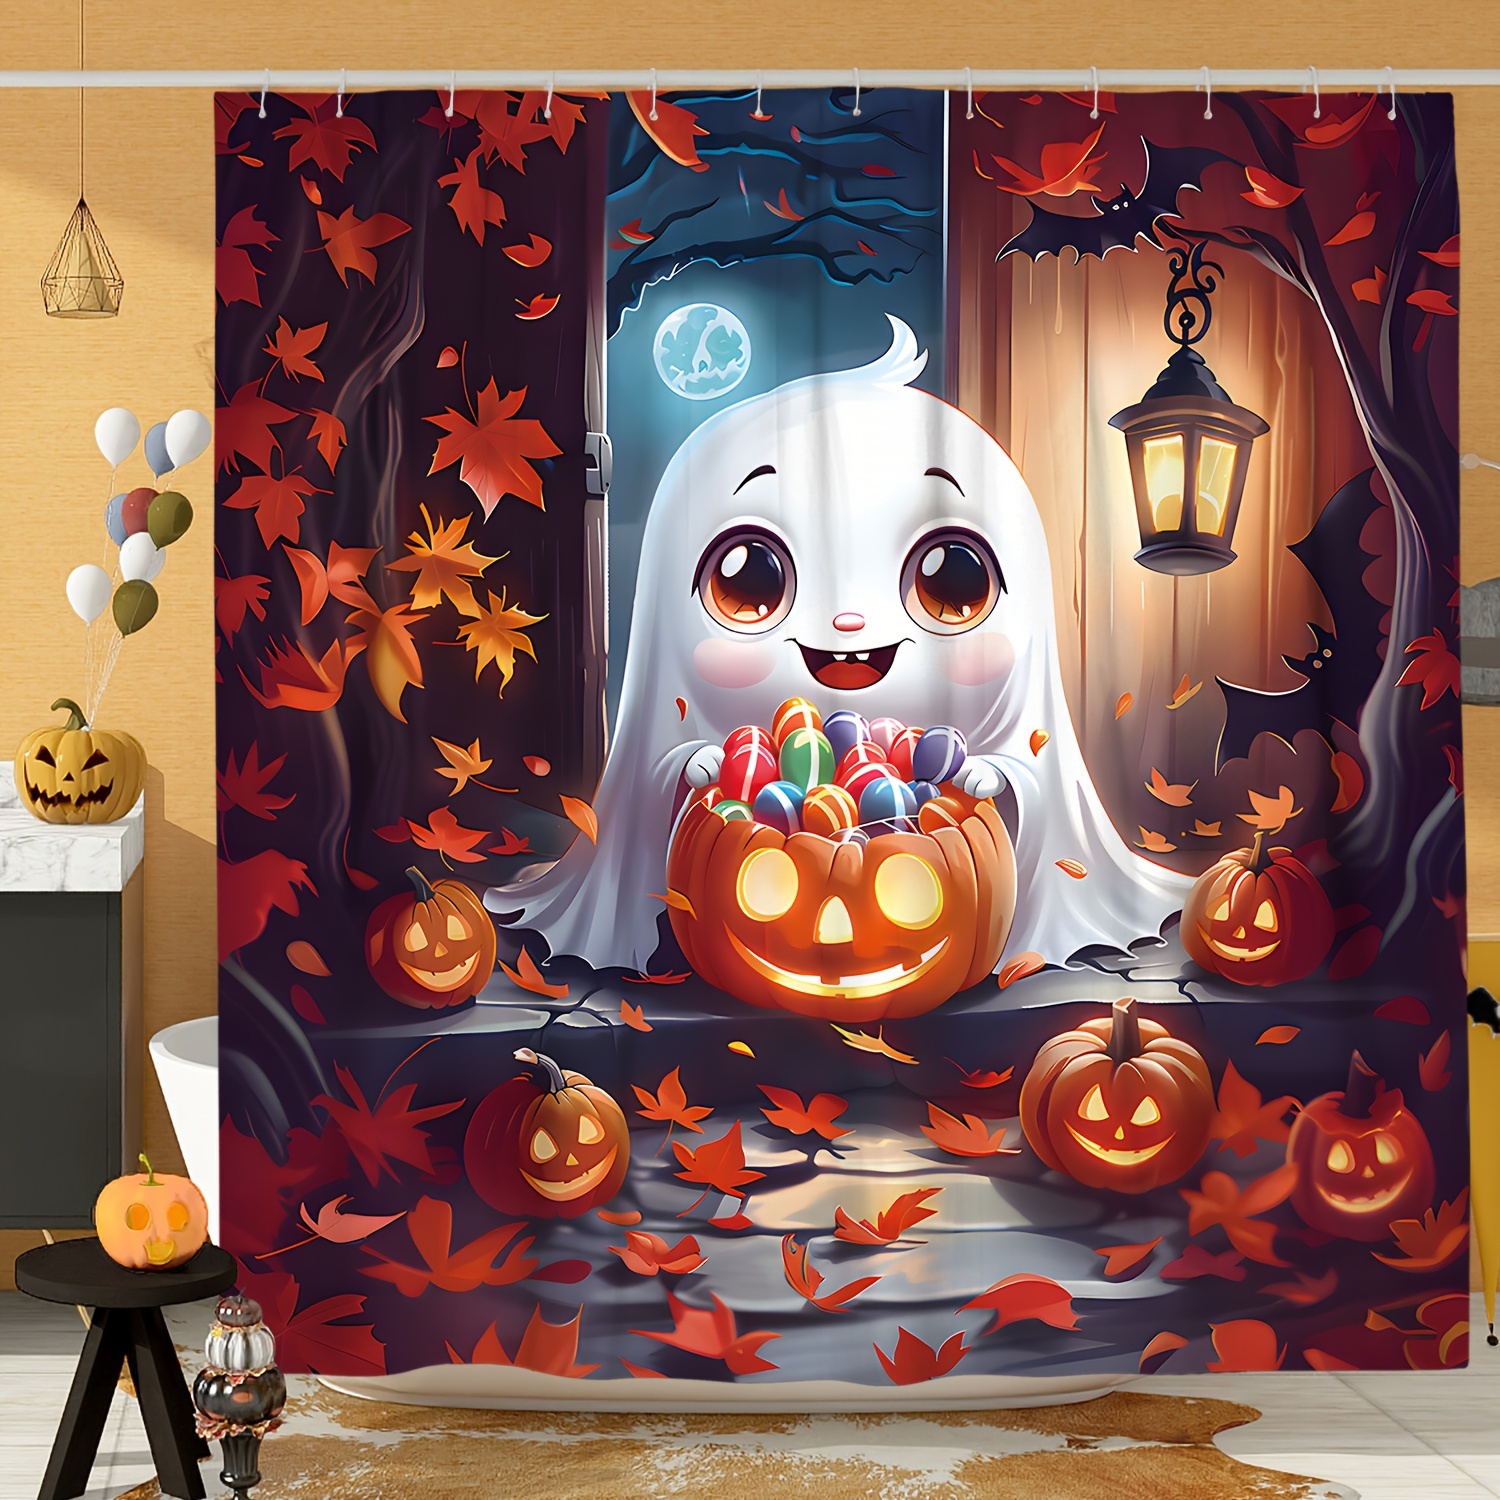 

Halloween-themed Shower Curtain Set - Cute Ghost & Pumpkin Design, Waterproof Polyester, 71x71 Inches, Includes 12 Hooks, Machine Washable - Perfect For Spooky Bathroom Decor